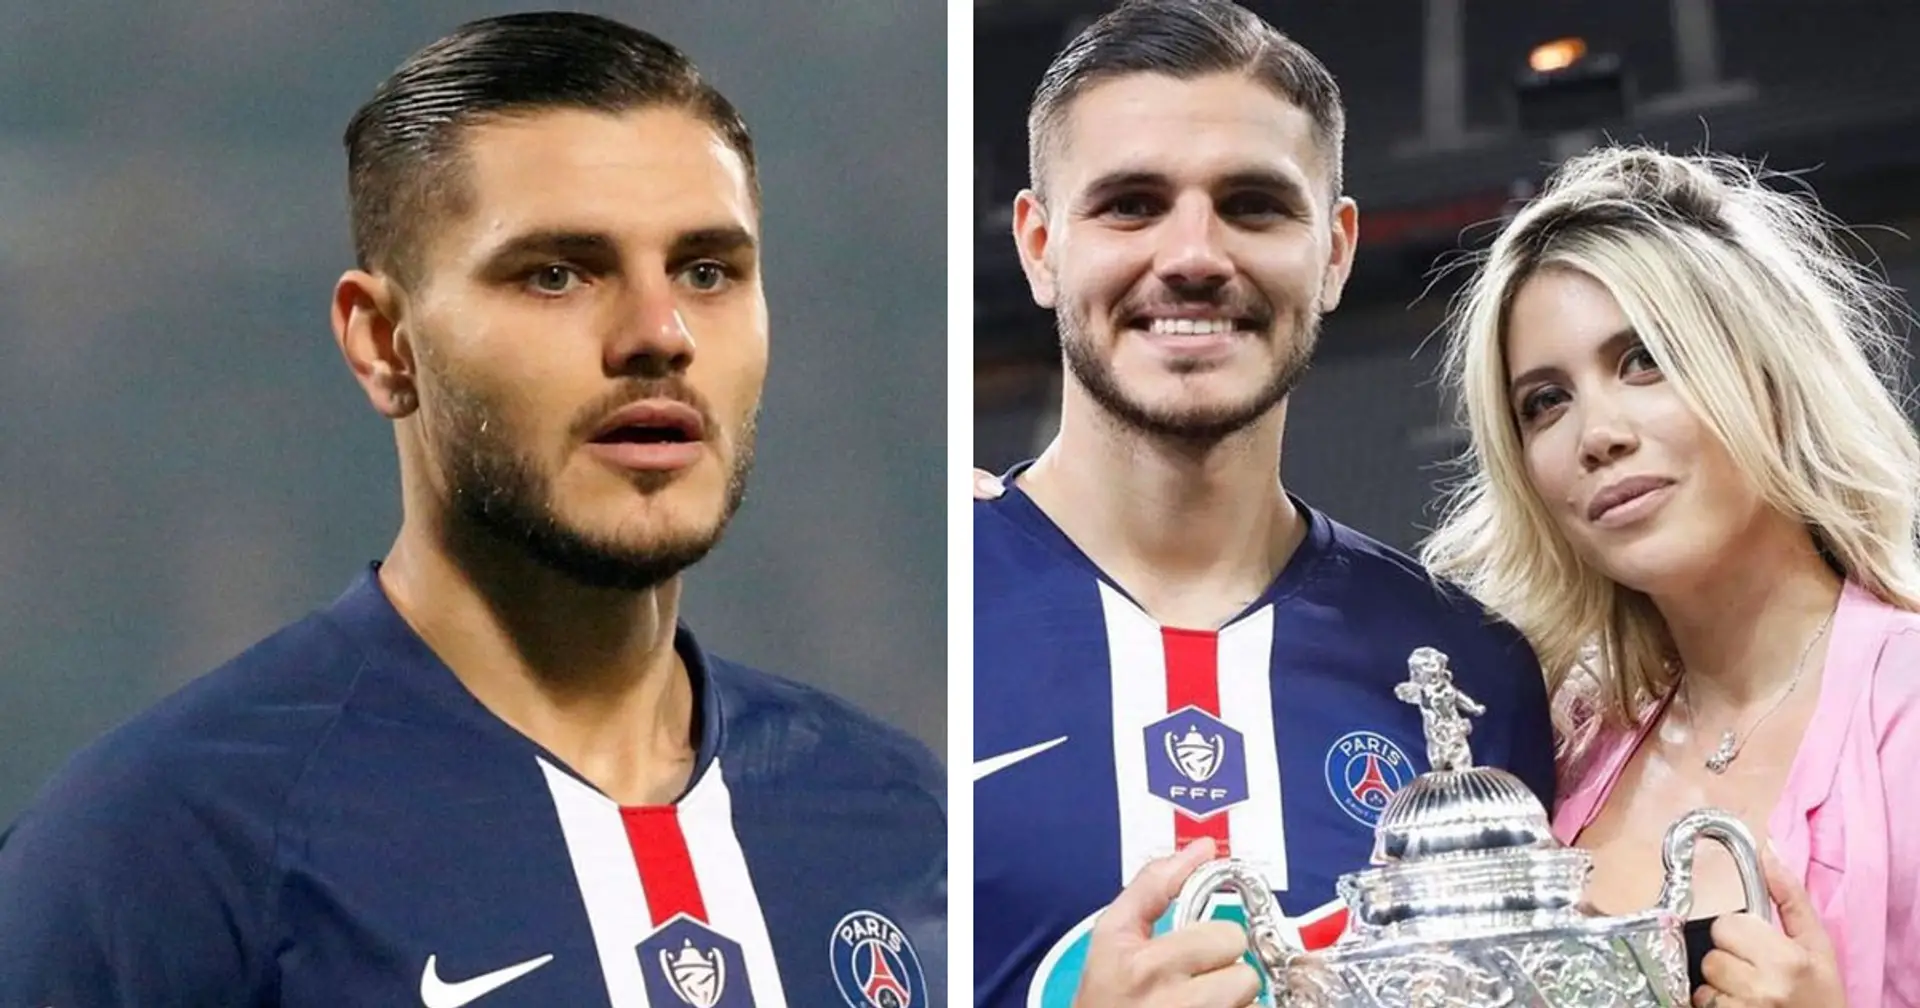 Mauro Icardi 'signed a contract' to save marriage with Wanda Nara - stunning details revealed